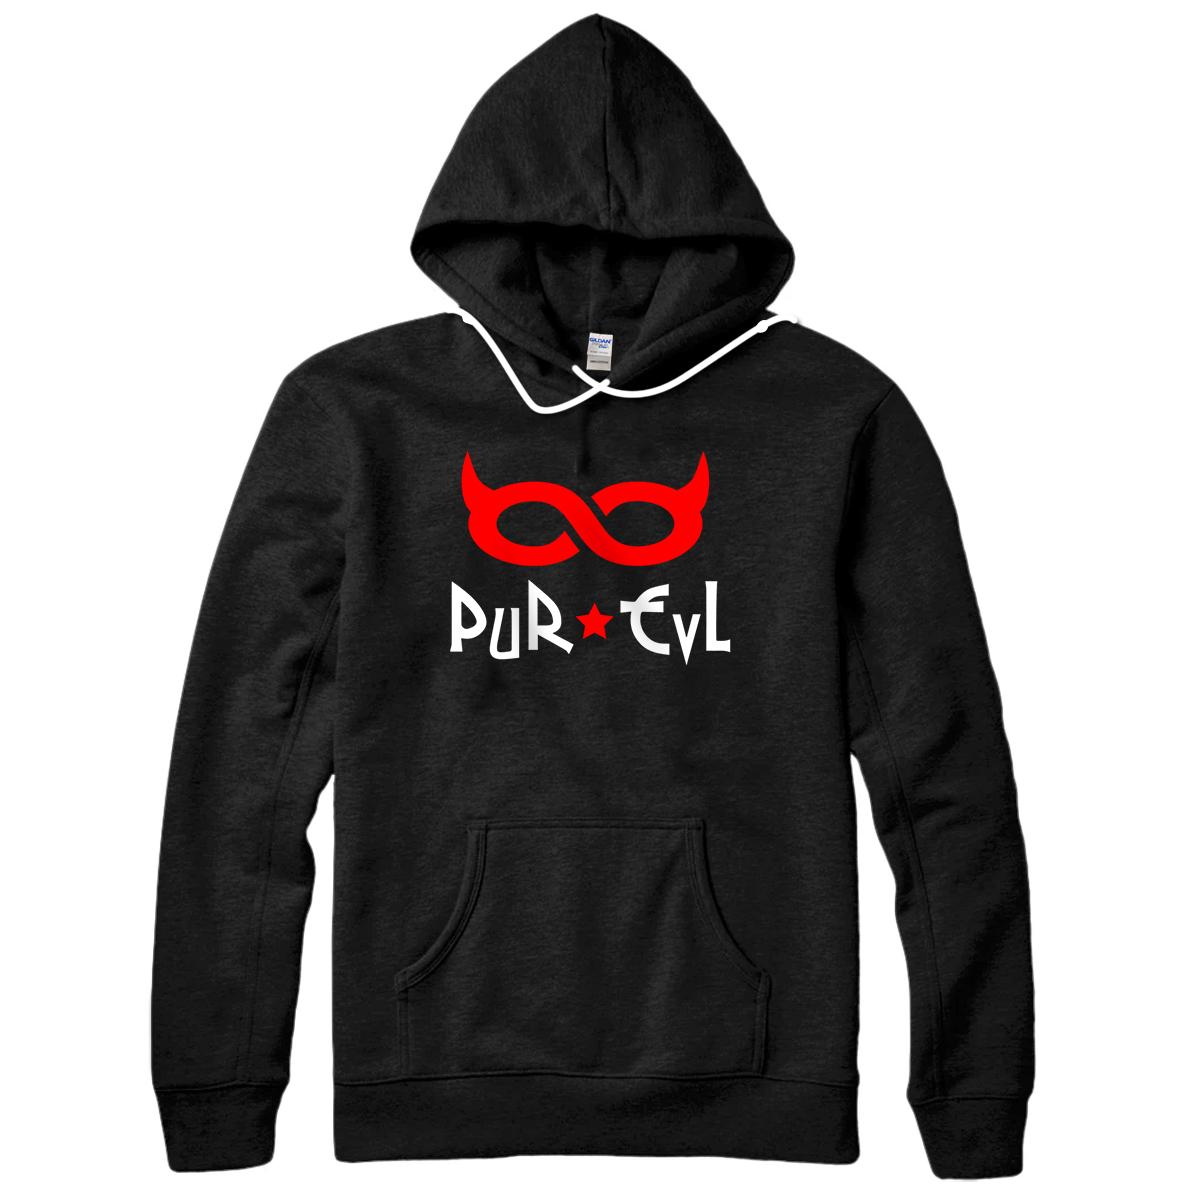 Personalized PuR EvL Pullover Hoodie